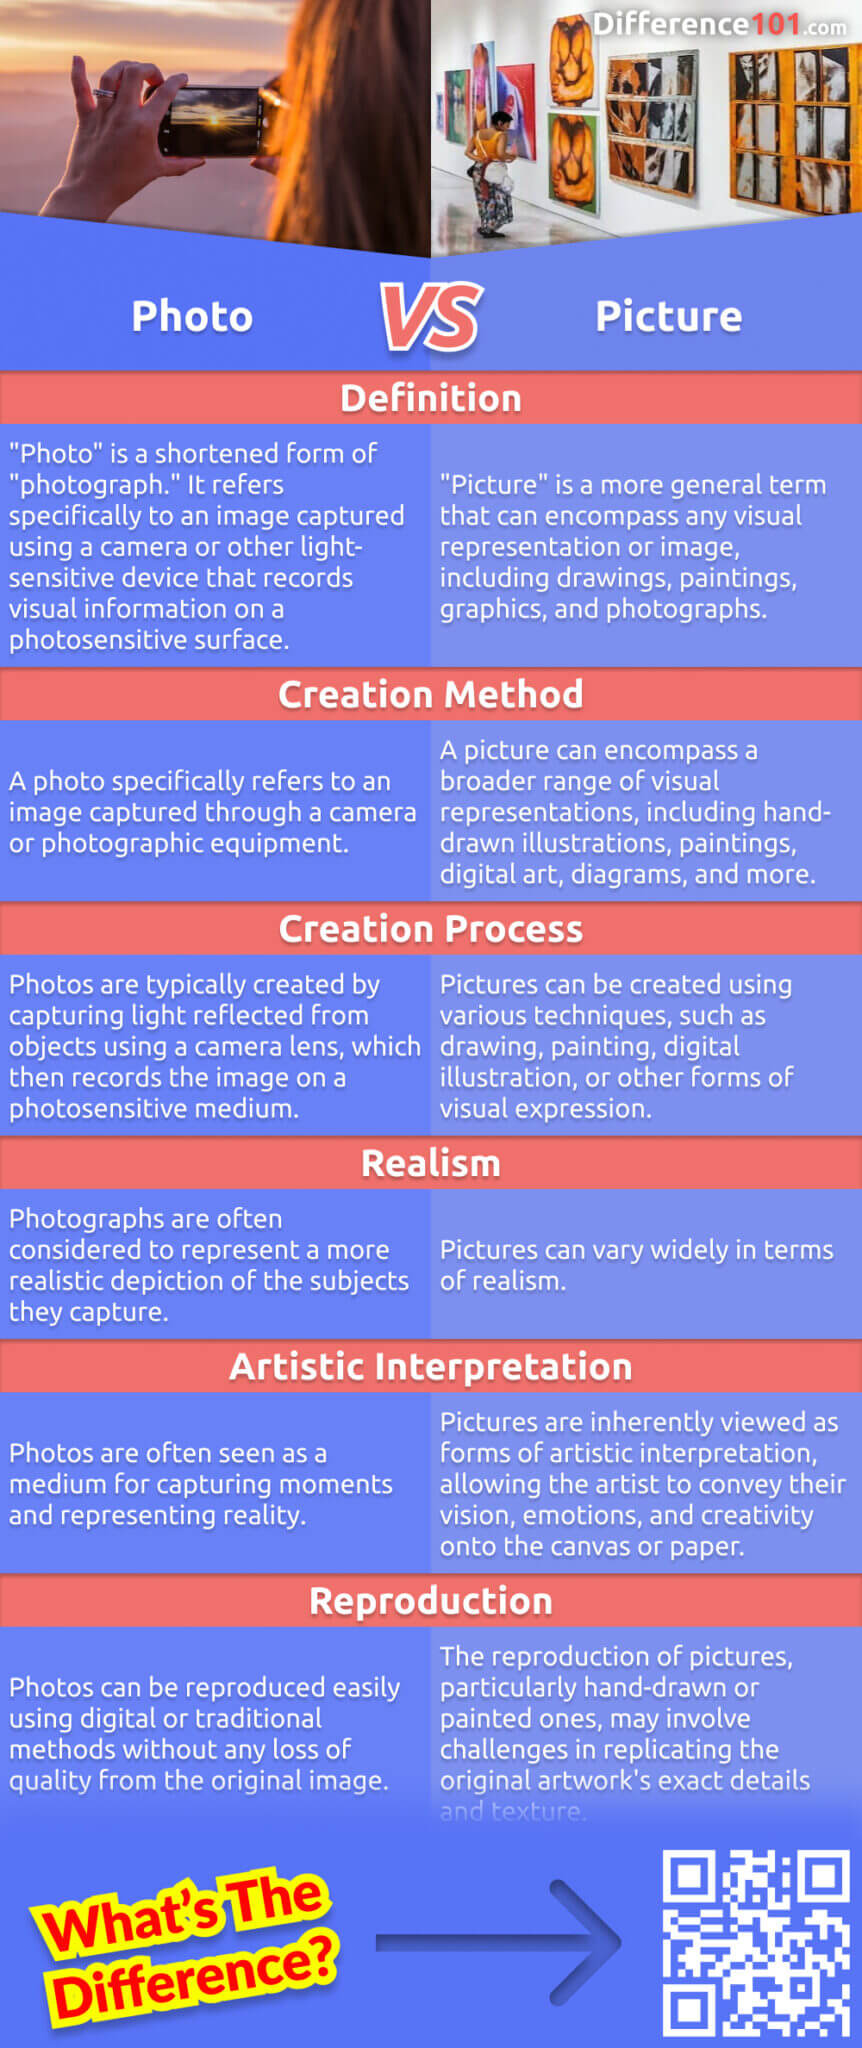 What is the difference between a photo and a picture? Explore the distinctions, pros, and cons of these visual representations in this illuminating article. Enhance your understanding of these mediums for capturing moments and expressing creativity.